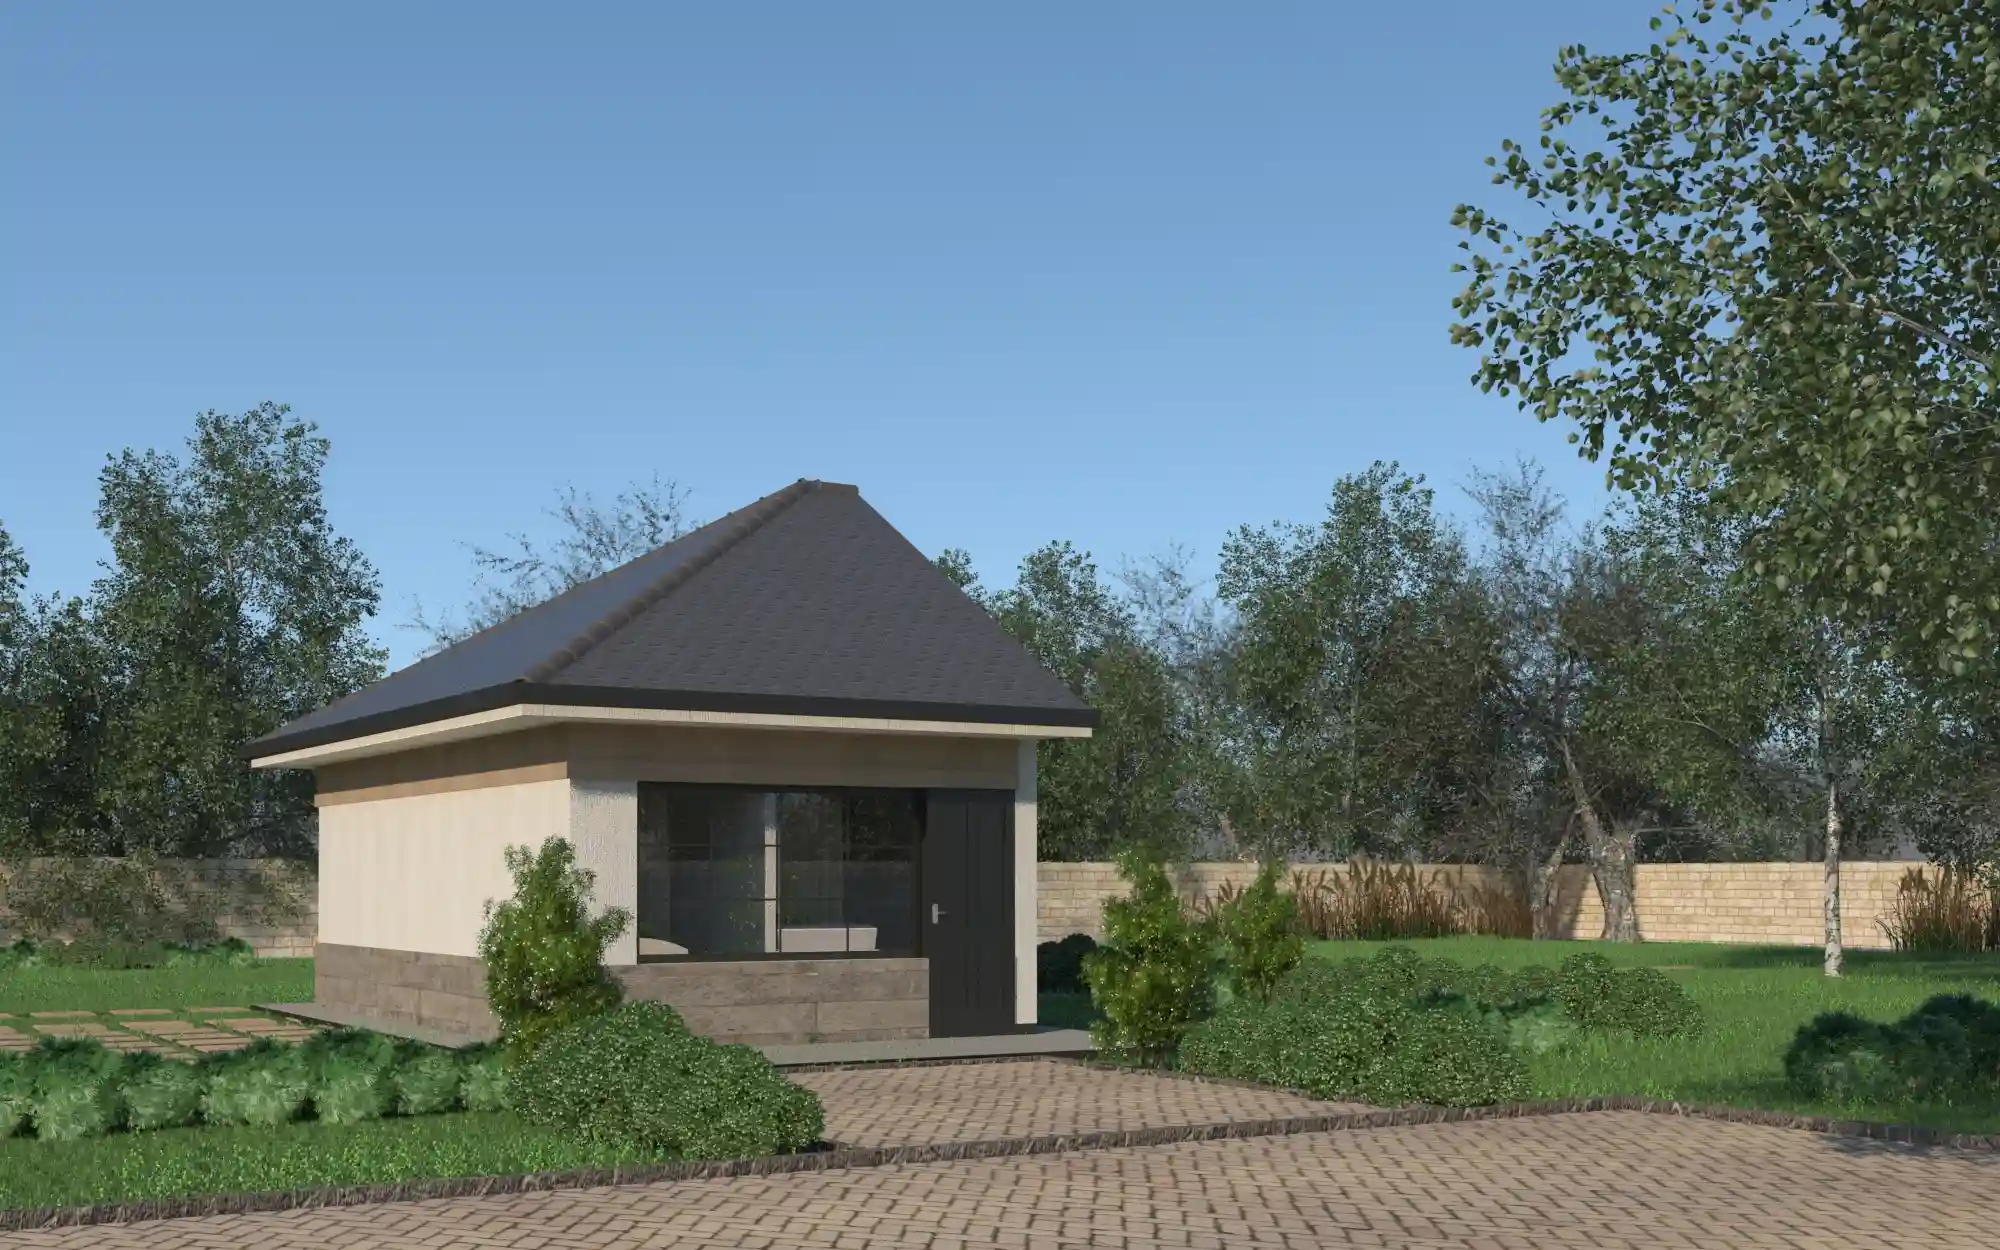 3 Bedroom Bungalow - ID 3191 - 3191_Phase1_Front.jpg from Inuua Tujenge house plans with 3 bedrooms and 2 bathrooms. ( jengapolepole )